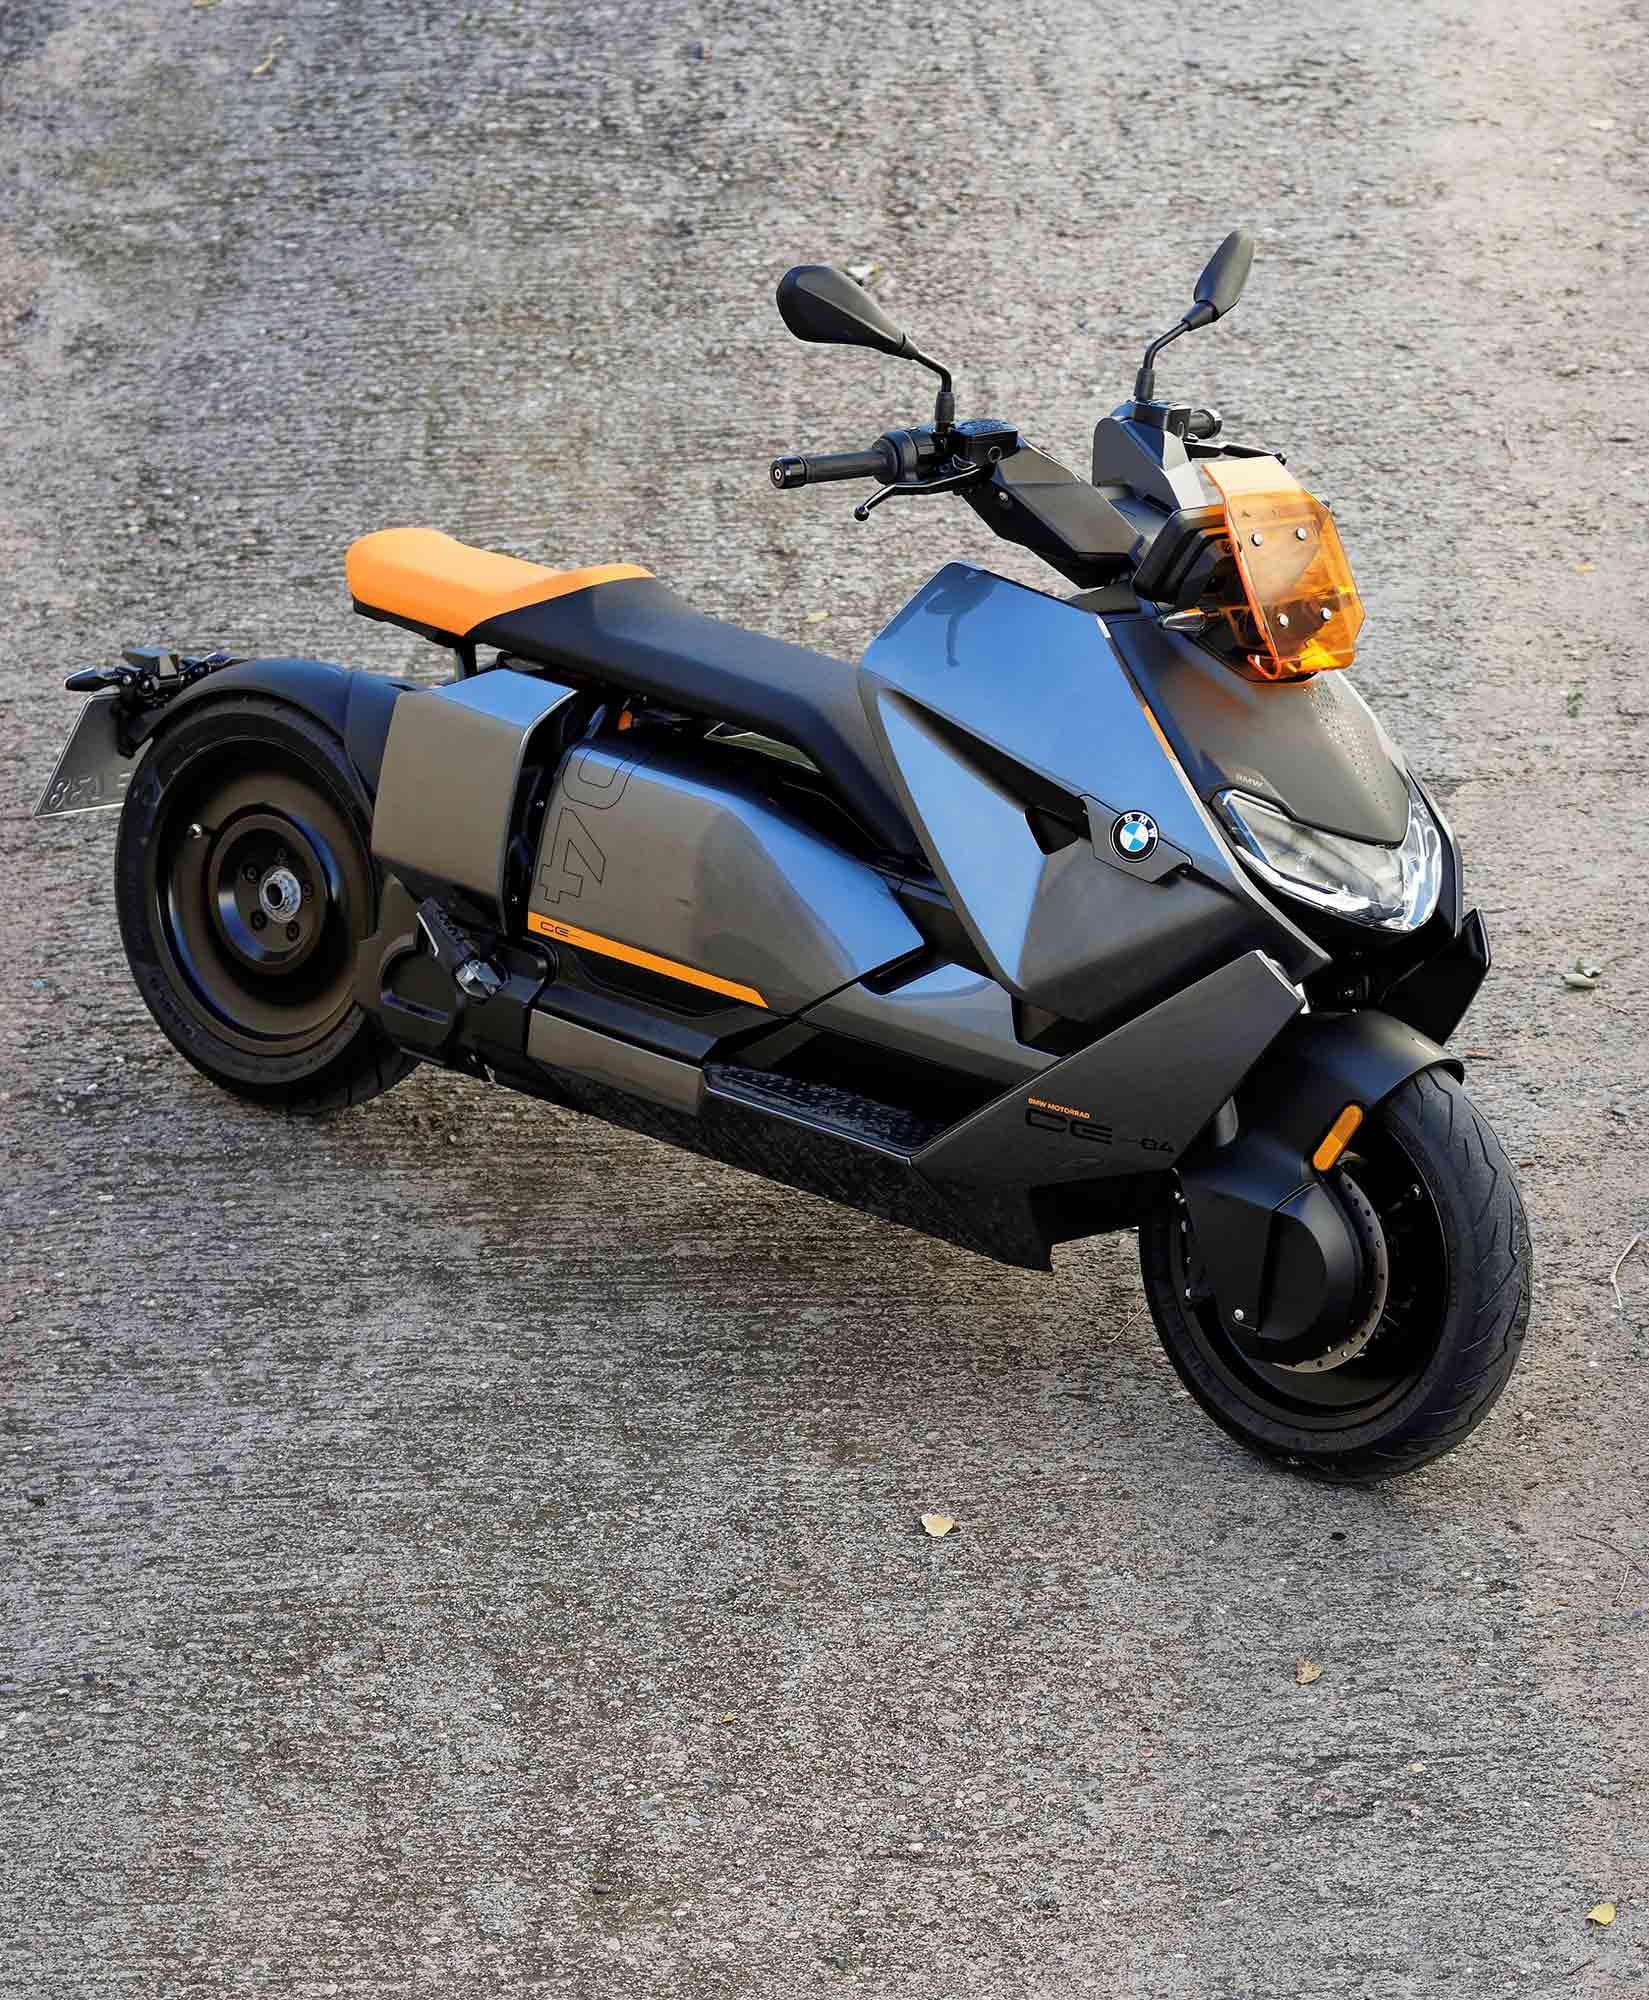 Eventyrer halvkugle Kamel The Electric 2022 BMW CE 04 Scooter | Cycle World